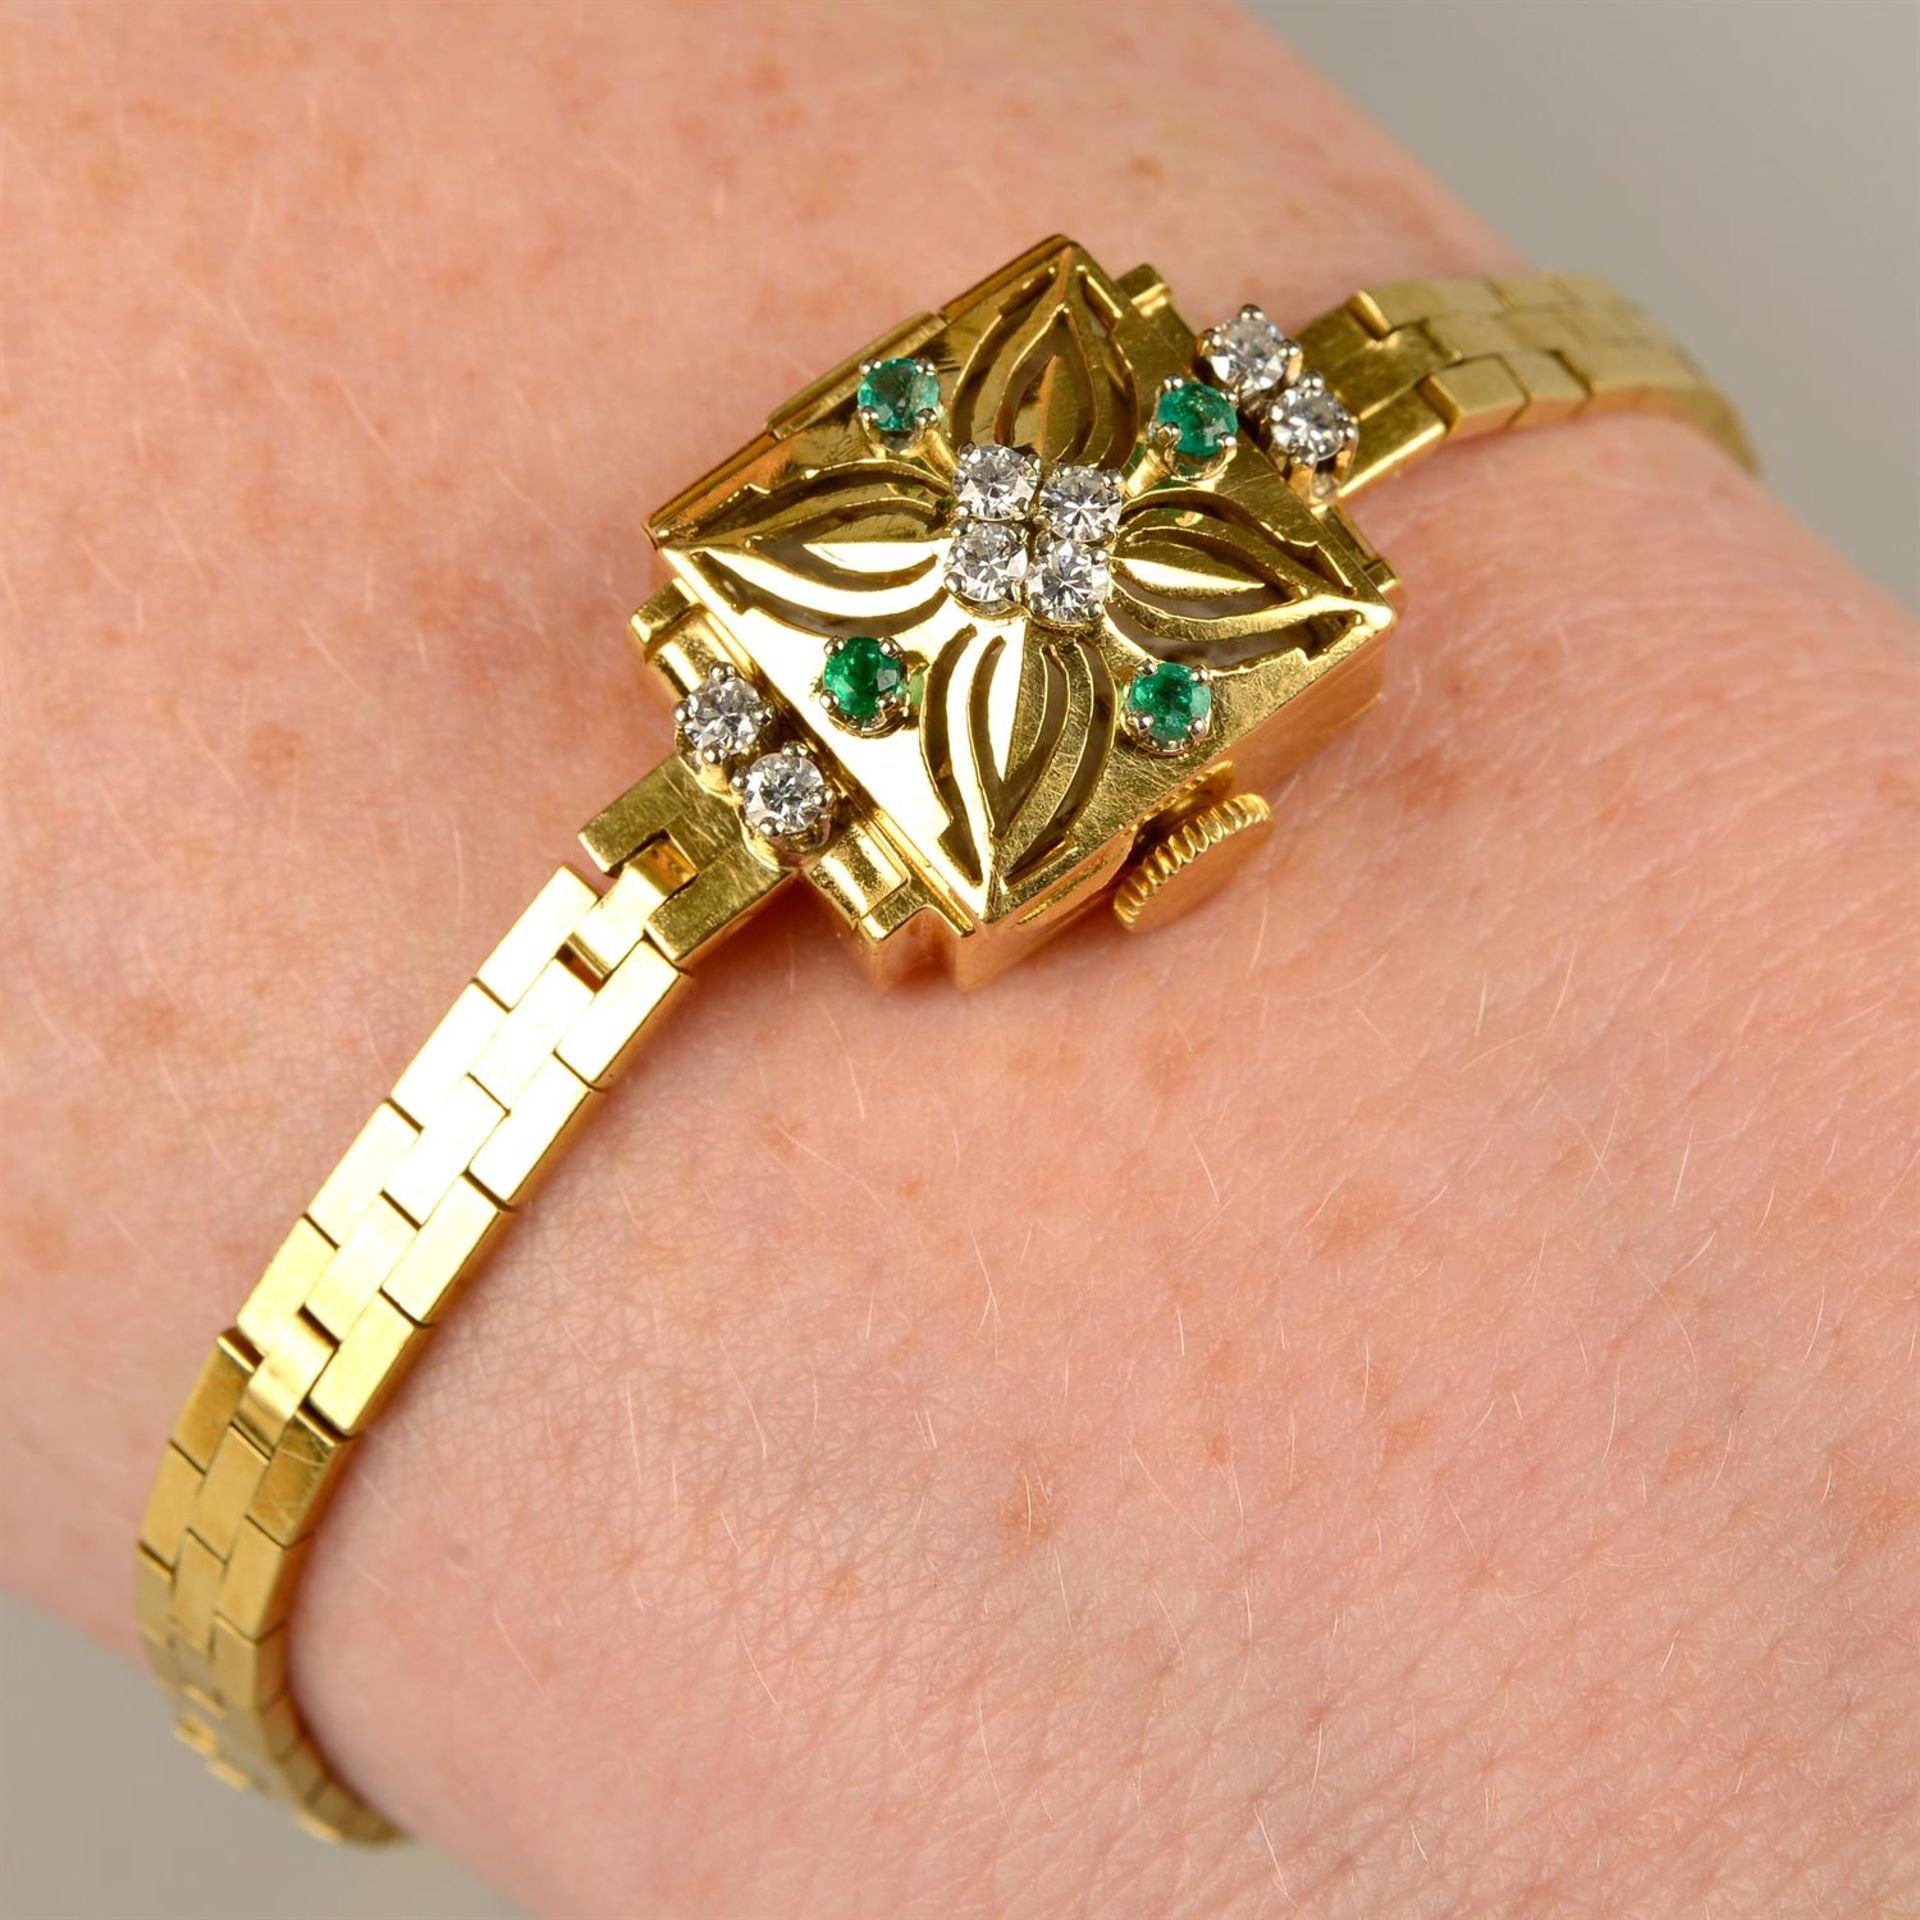 A lady's single-cut diamond and emerald cocktail watch, by Rolex.